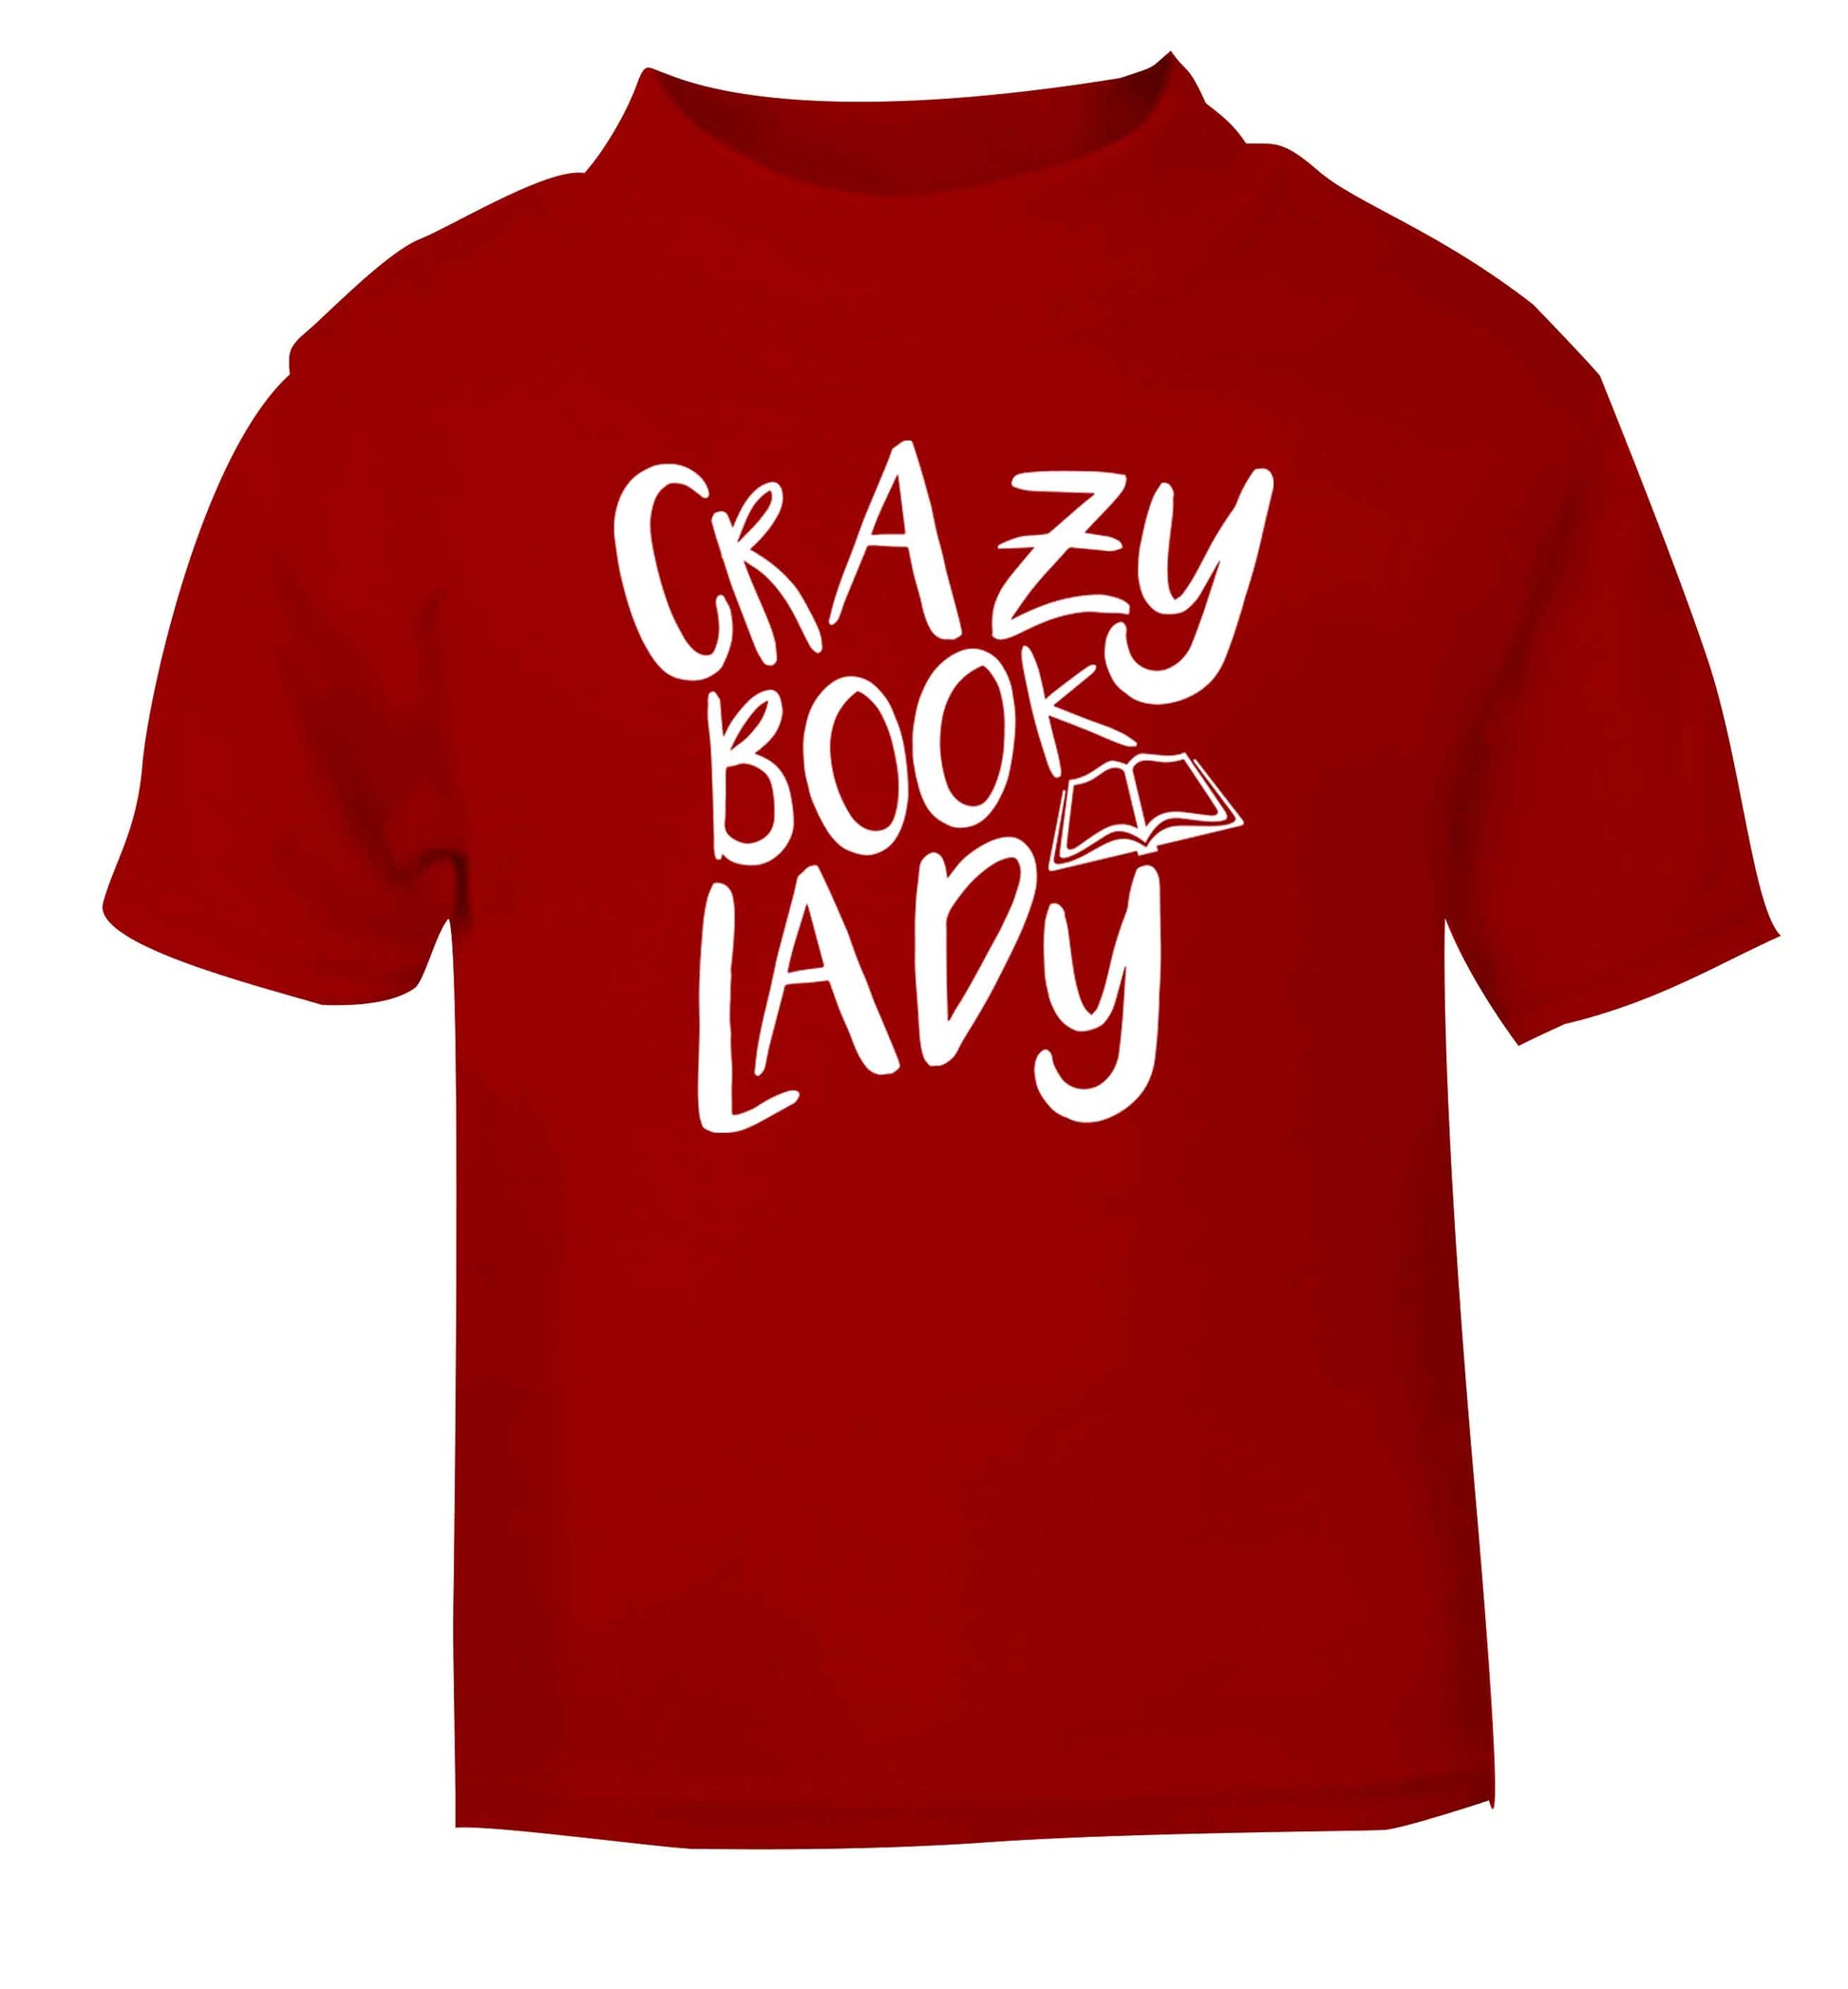 Crazy book lady red Baby Toddler Tshirt 2 Years